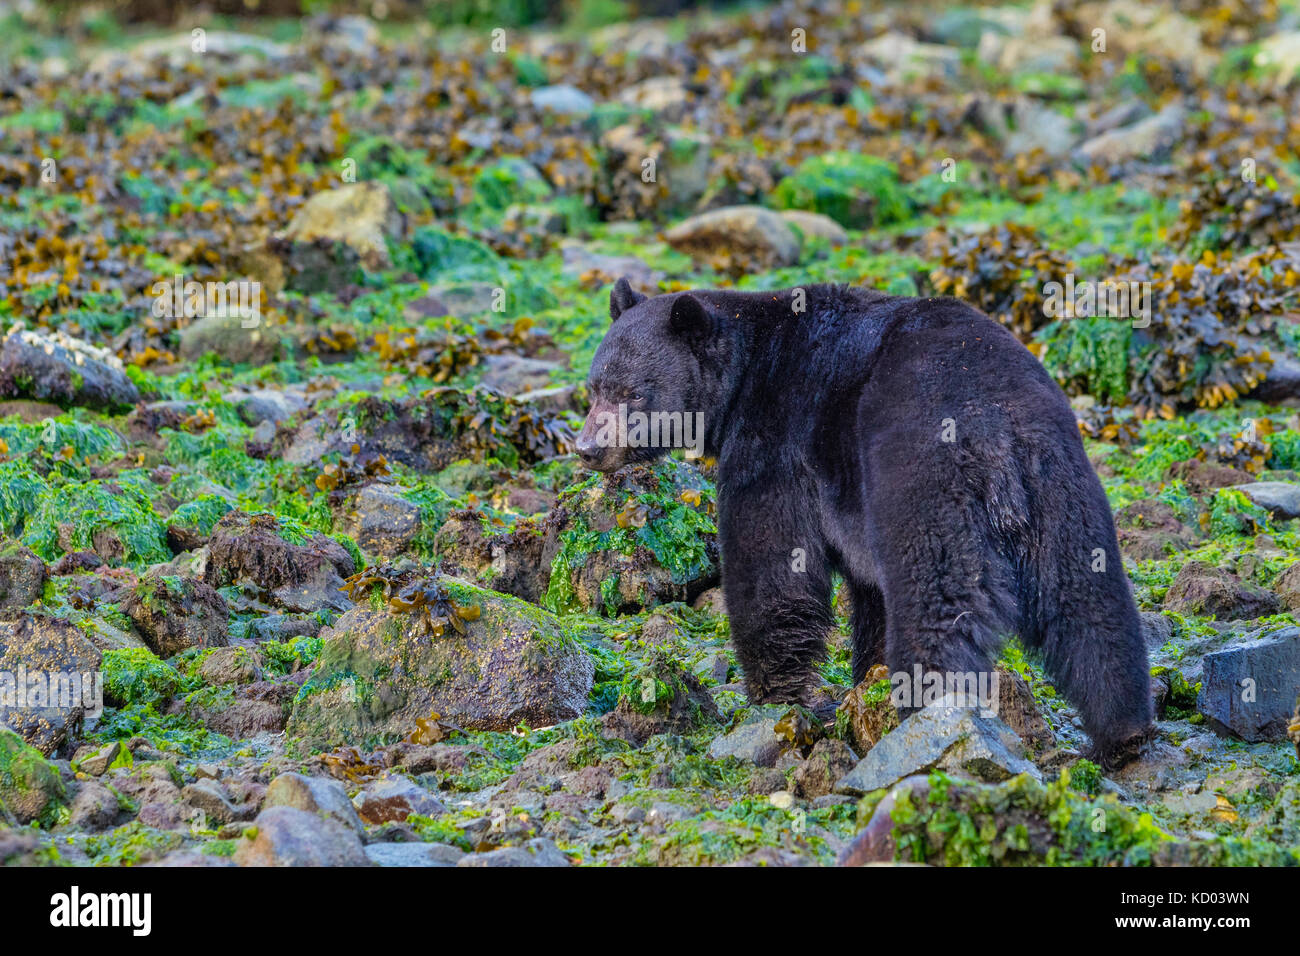 Black bear feeding along the beach at low tide, rolling rocks in the search of crabs and mussels, British Columbia, Canada. Stock Photo